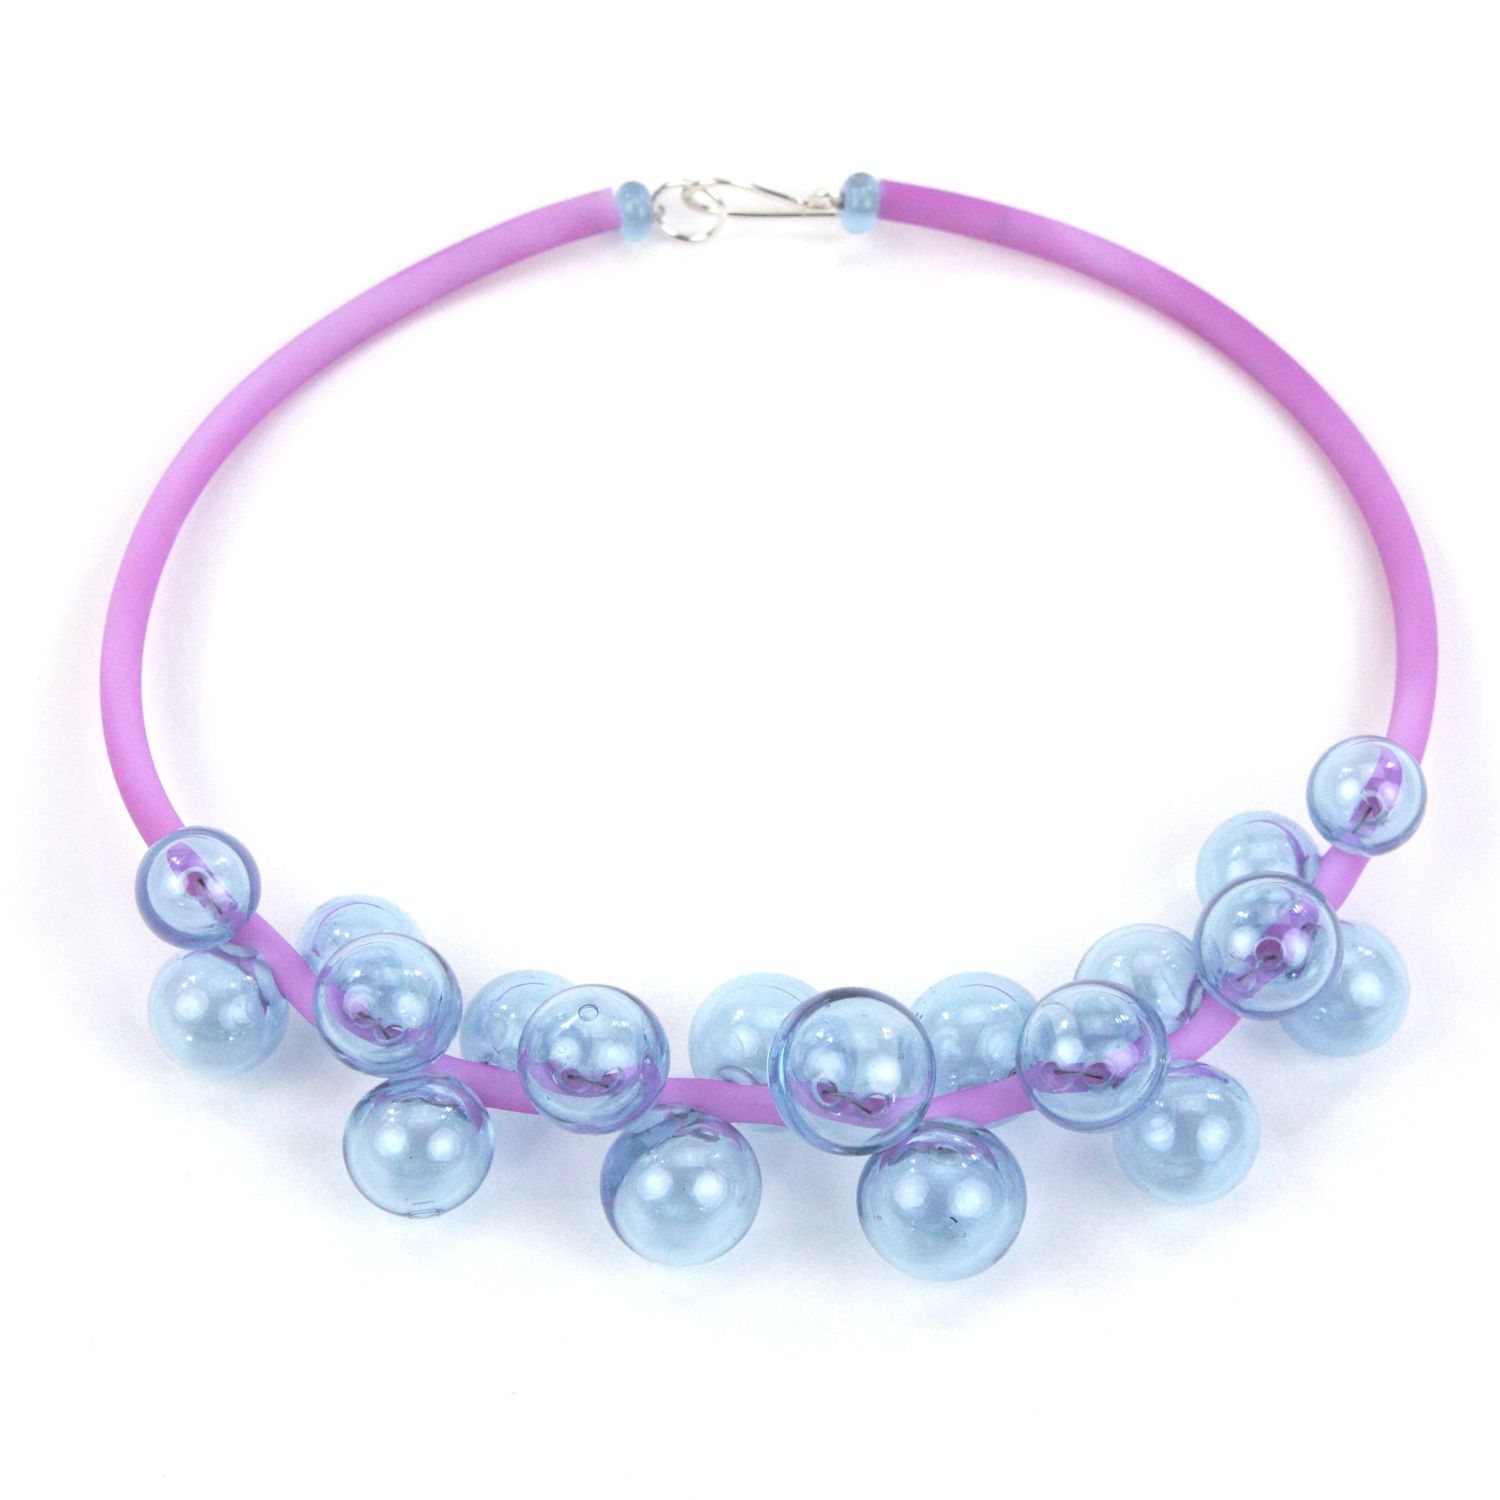 Alicia Niles: Chroma Bolla Necklace – Blue/Purple changing colour Product Image 3 of 6